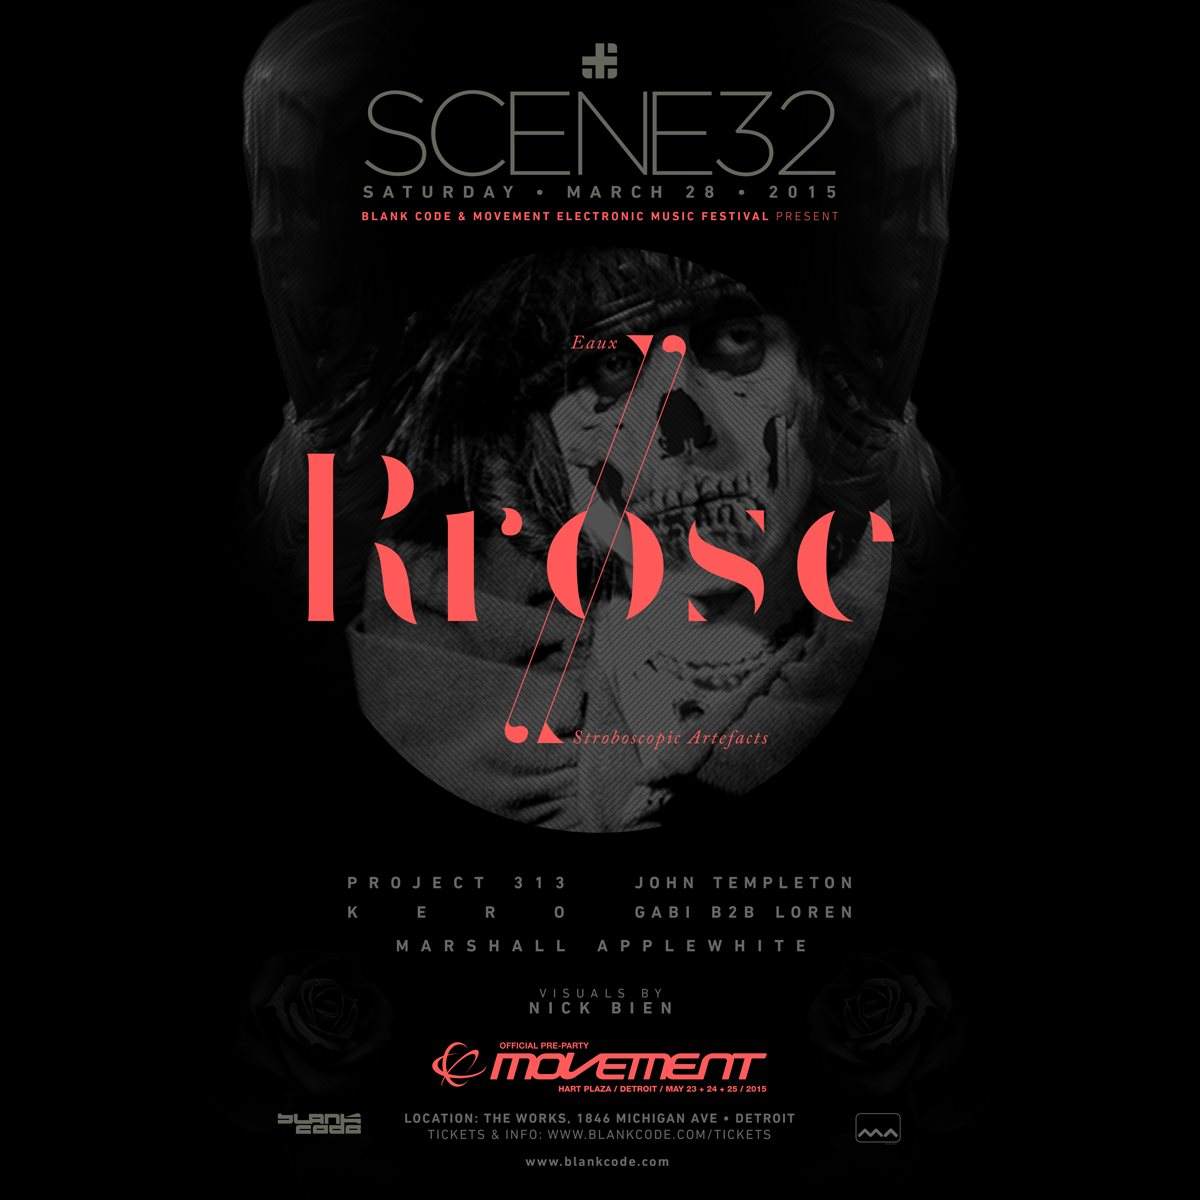 Scene 32 with Rrose - Live - Official Movement Pre Party - フライヤー裏